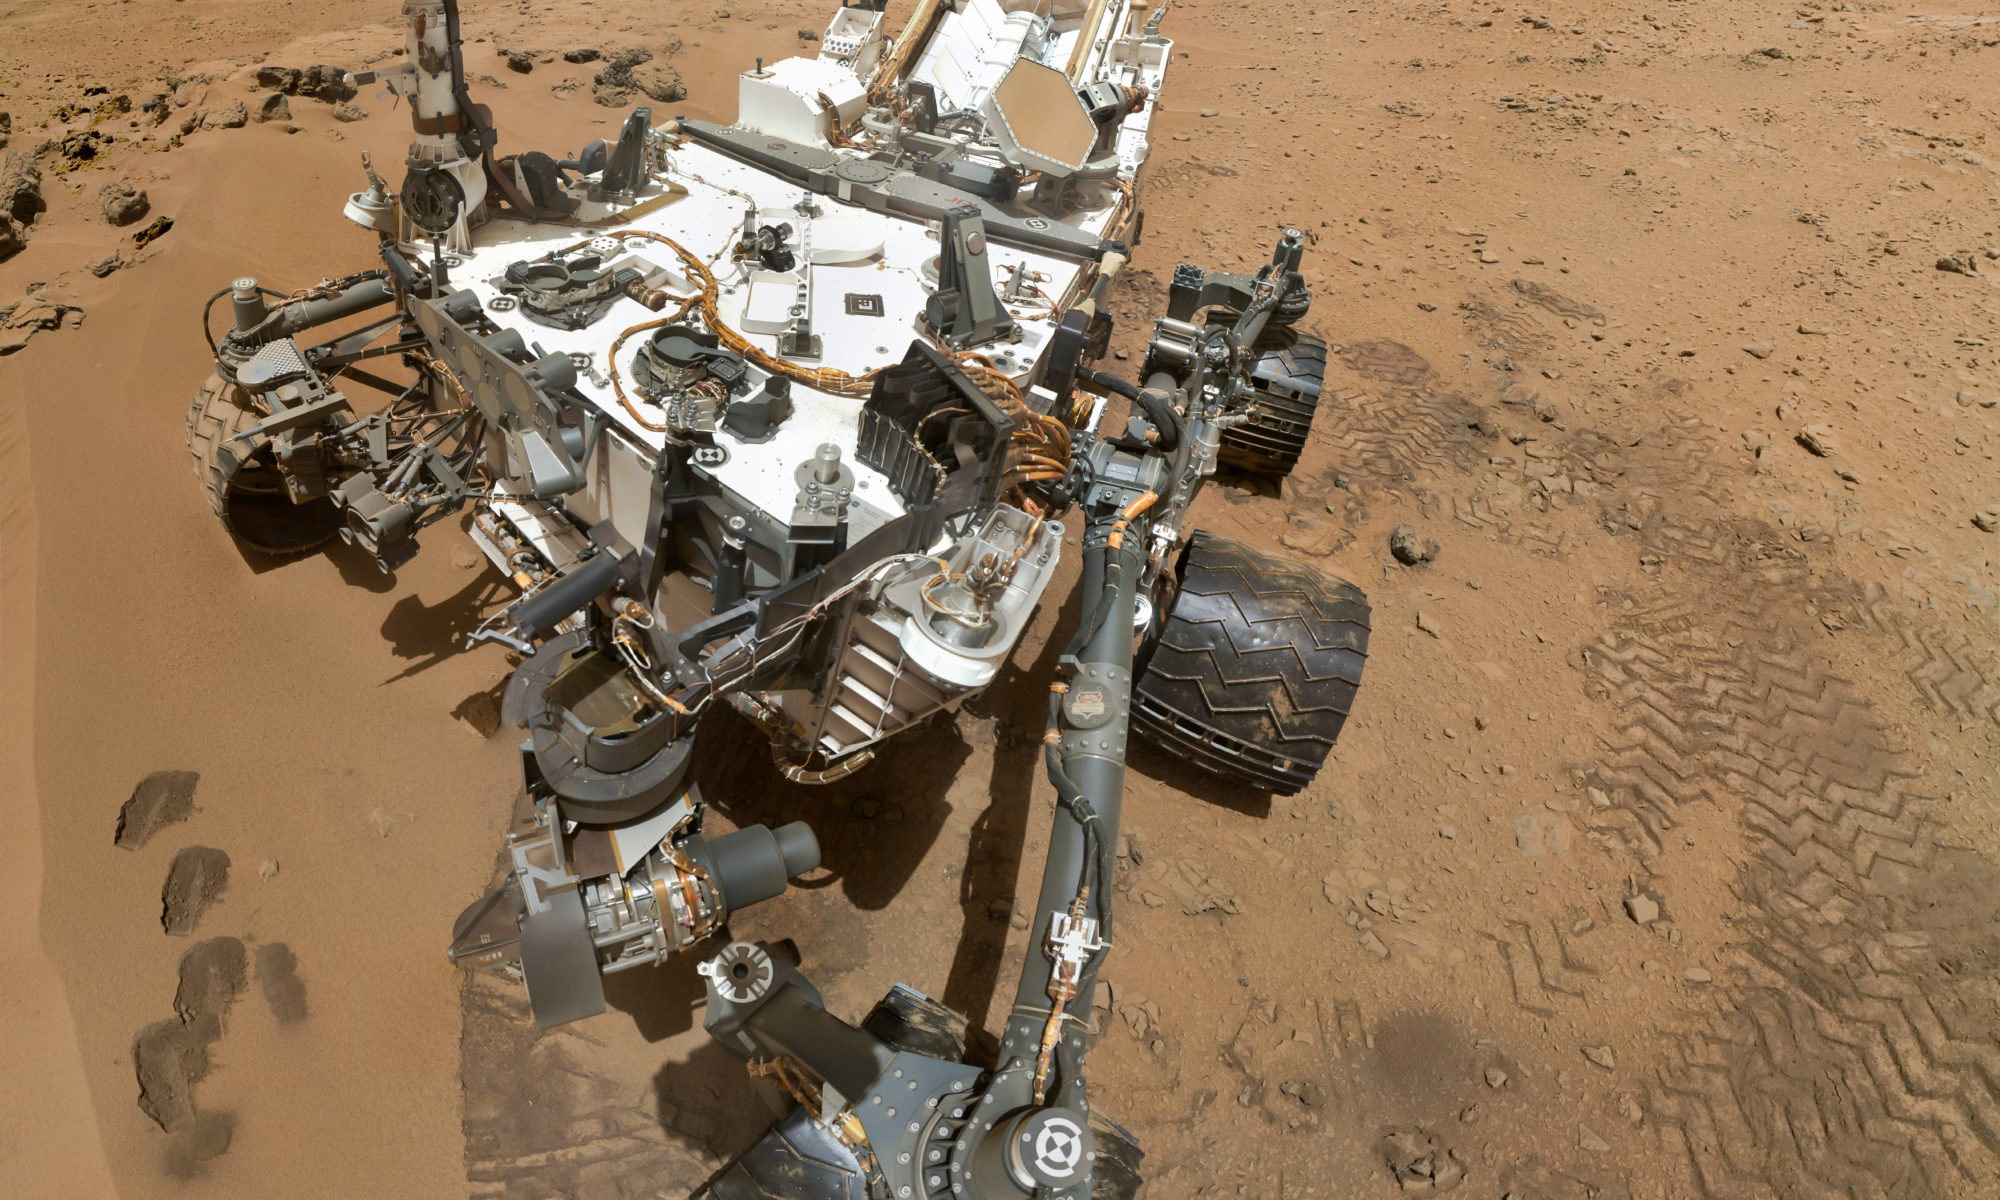 Self portrait of NASA's Curiosity rover. Curiosity is currently climbing Moount Sharp, which can be seen rising on the right-hand side of the image, seeking signs that Mars have been a habitable planet in the past.